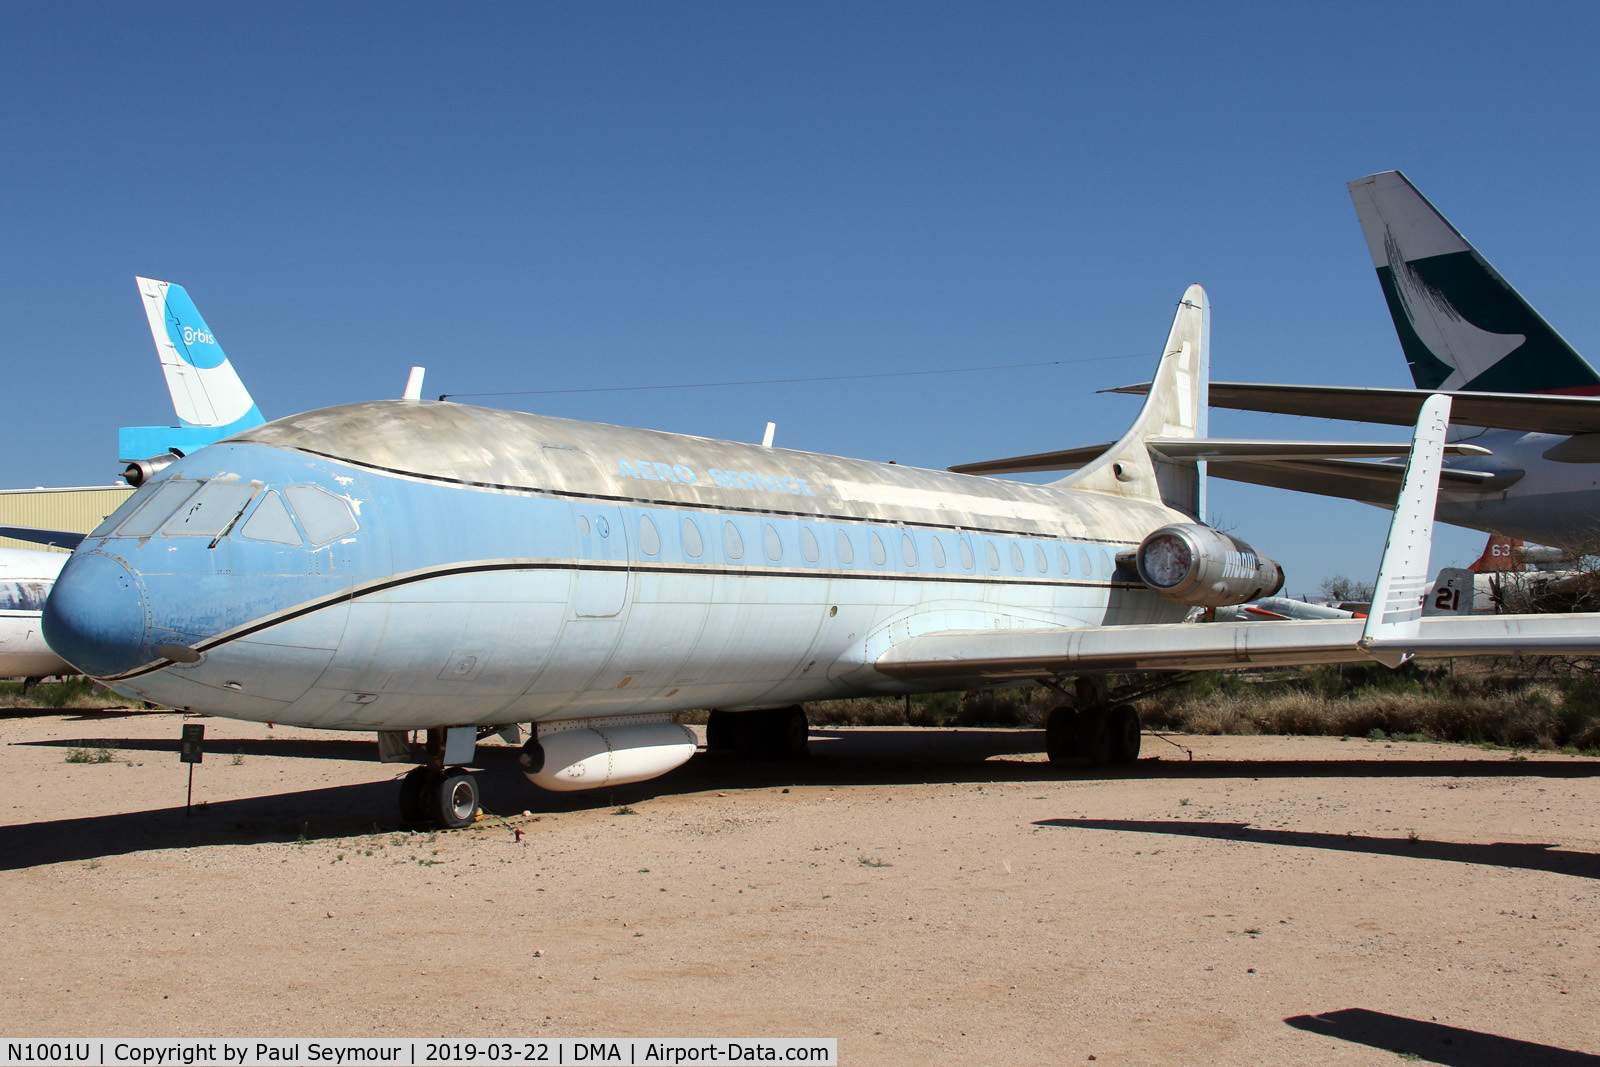 N1001U, 1961 Sud Aviation SE-210 Caravelle VI-R C/N 86, Preserved at the Pima Air and Space Museum which next to Davis  Monthan AFB from 1990. It was clearly not destroyed. Delivered to United Airlines in 1961. Later used as a test aircraft by Goodyear Aerospace.